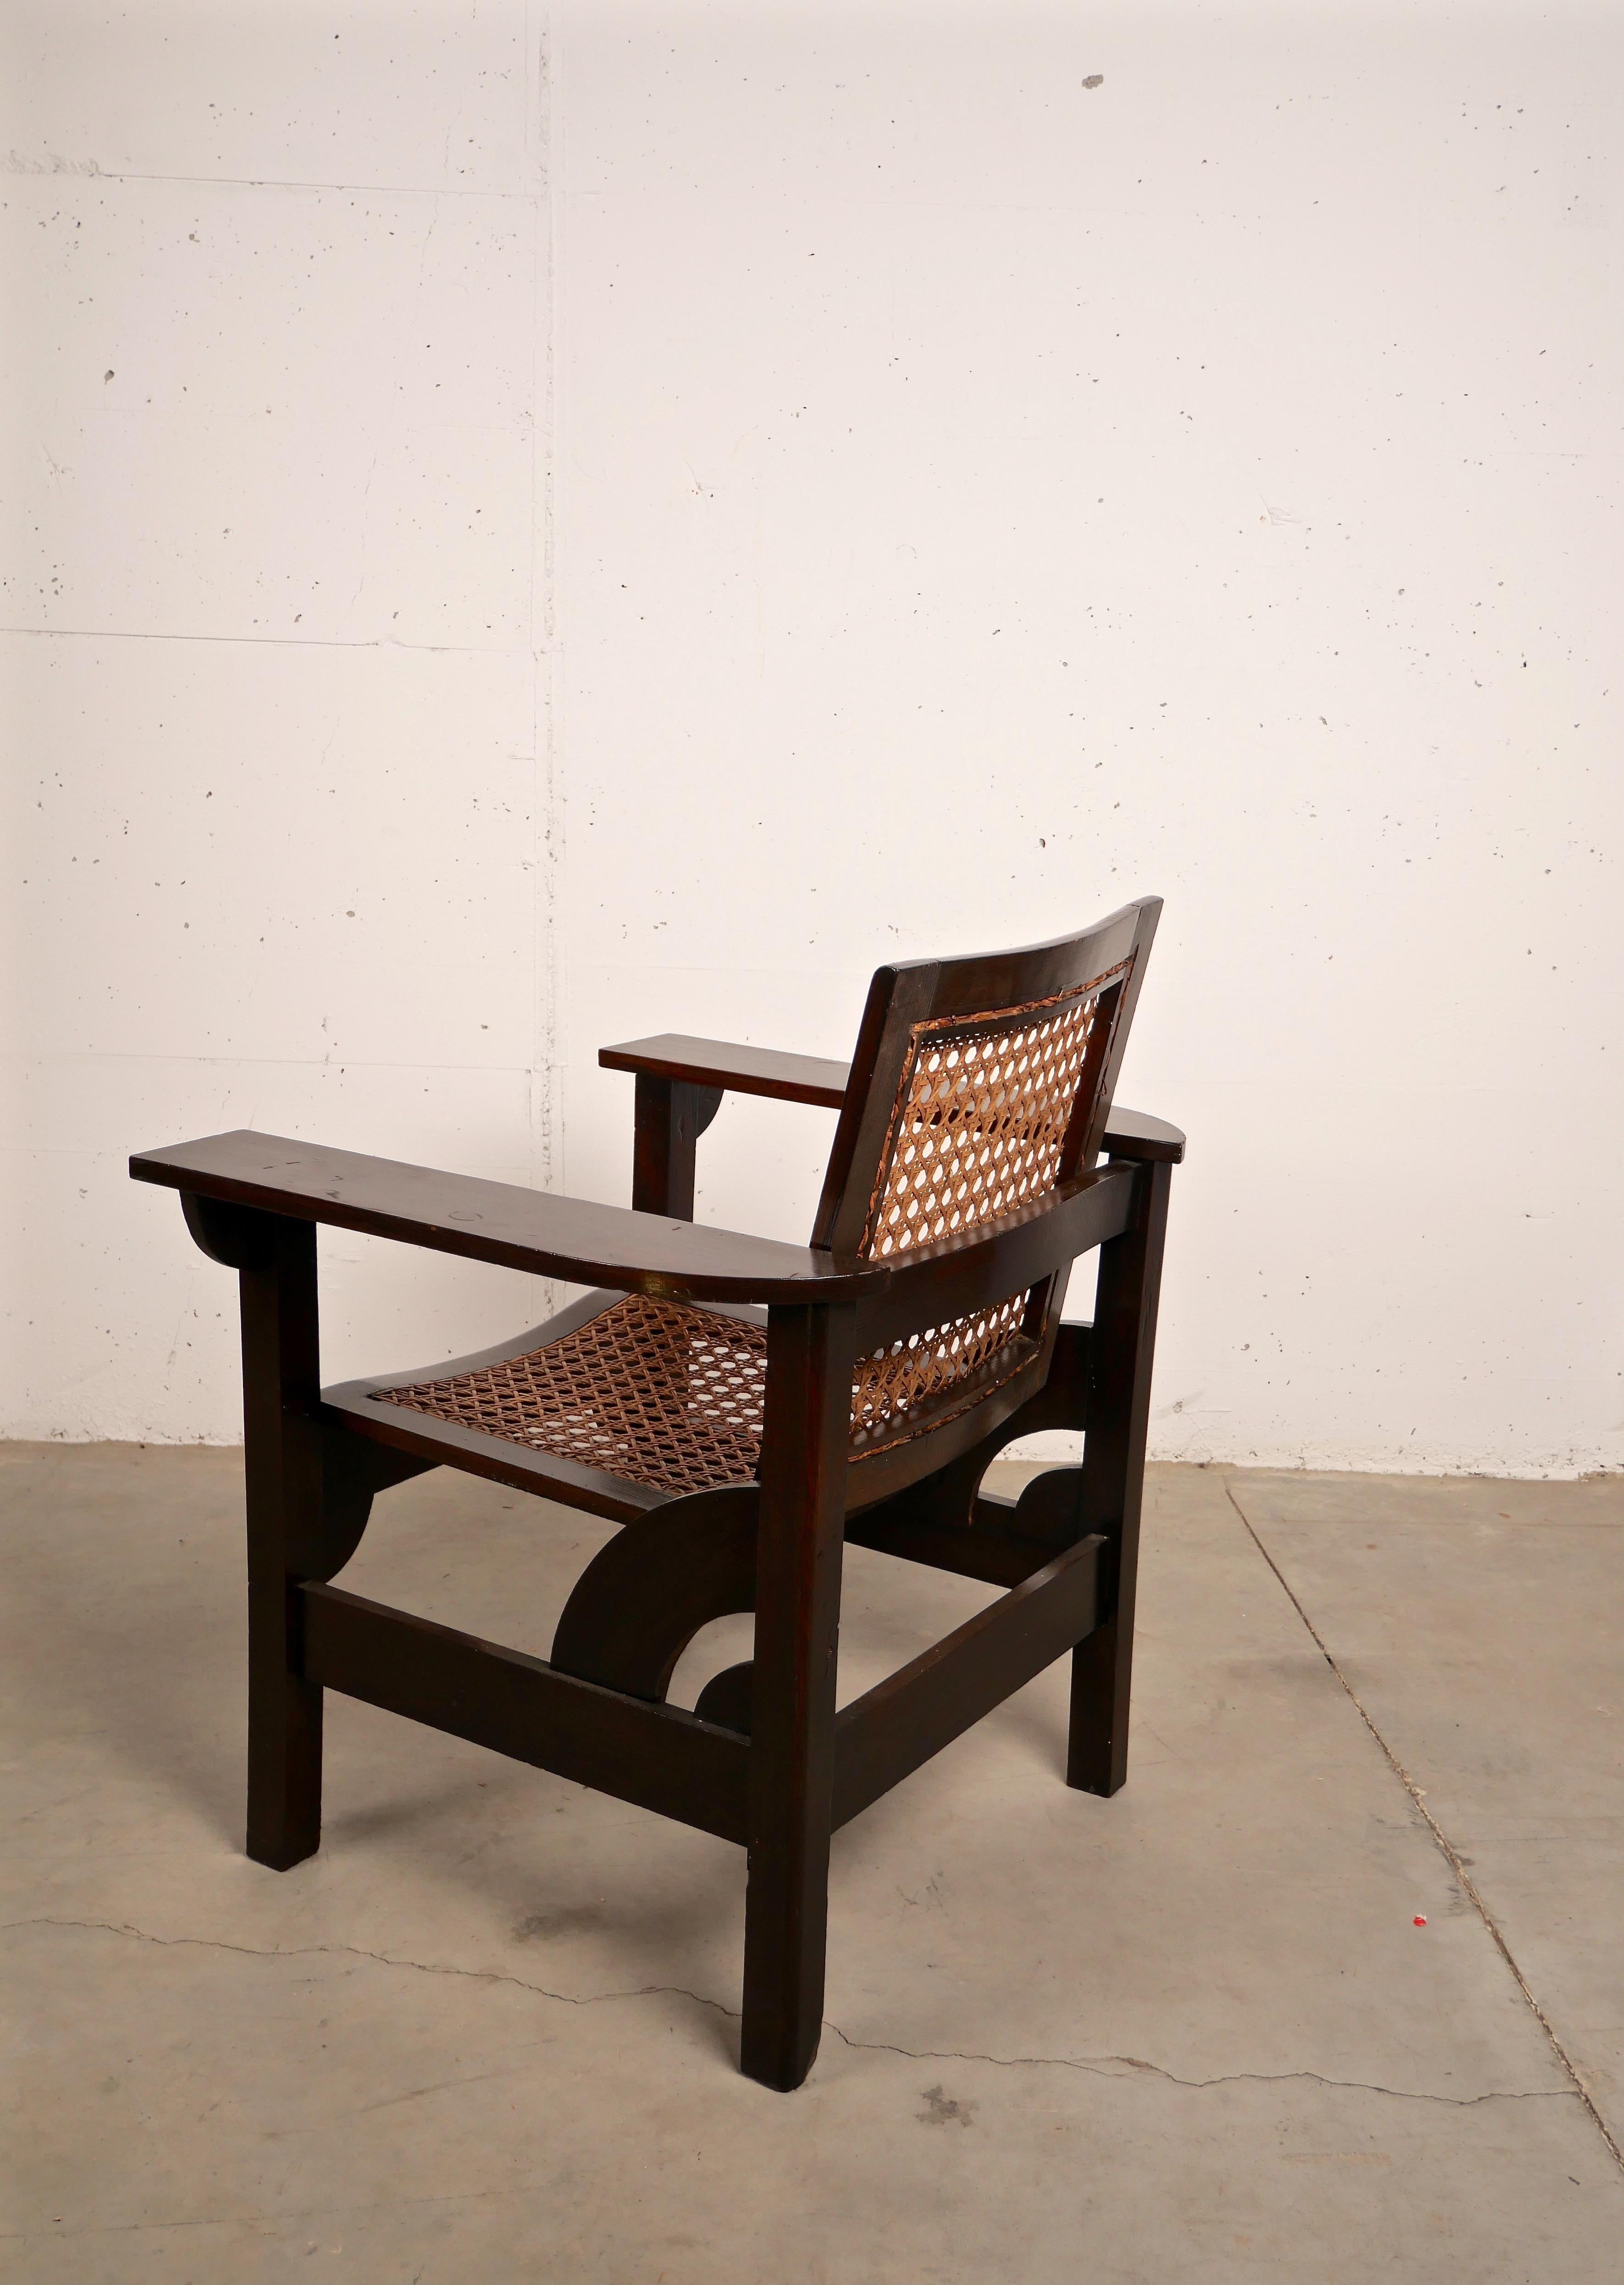 European Hendaye Armchair in Walnut and Cane by Pierre Dariel, France, 1930 For Sale